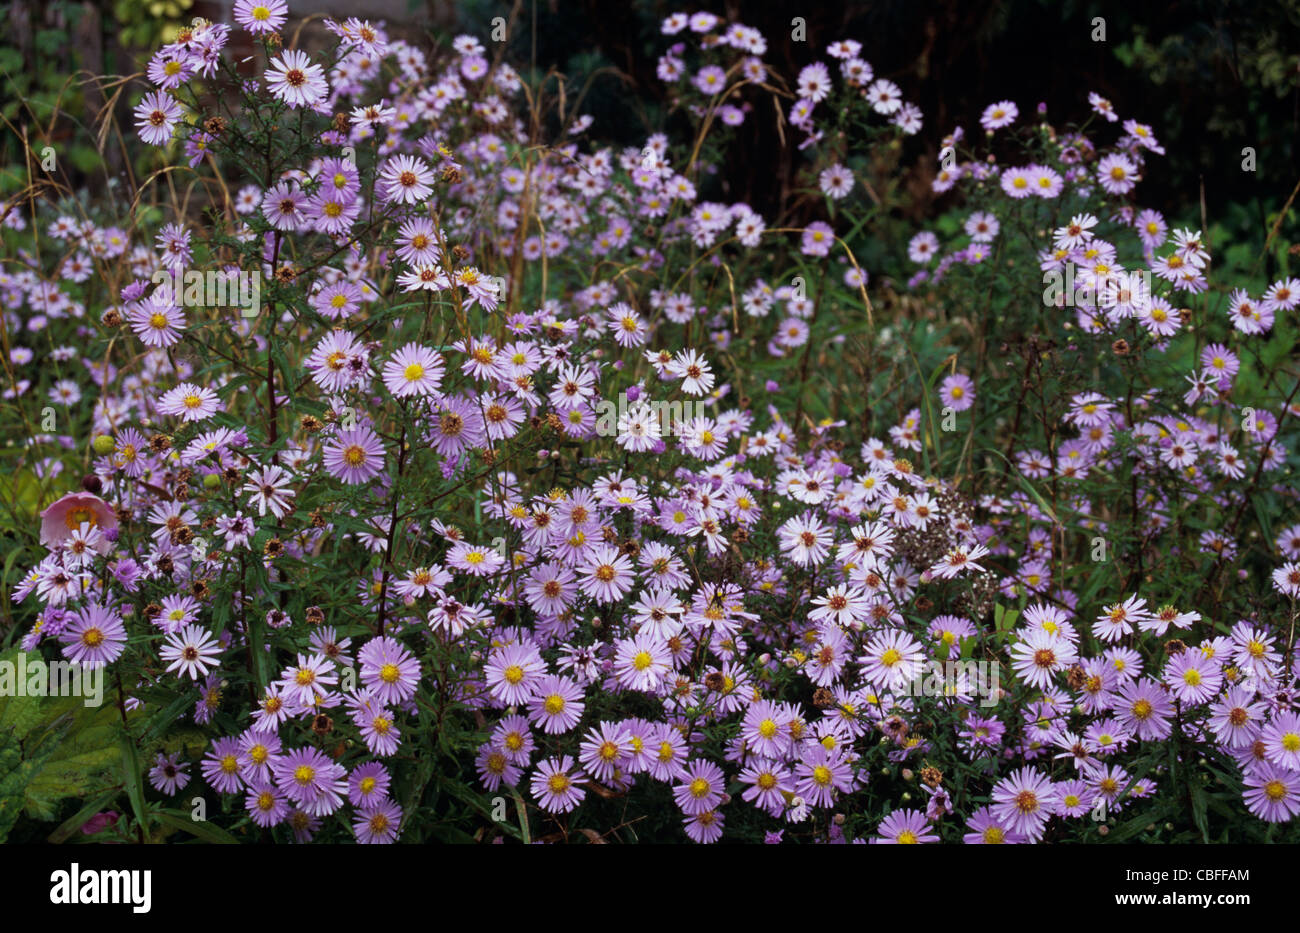 Part of clump of pale lilac Michaelmas daisies or Aster Ada Ballard growing with some blooms recent and others dying Stock Photo